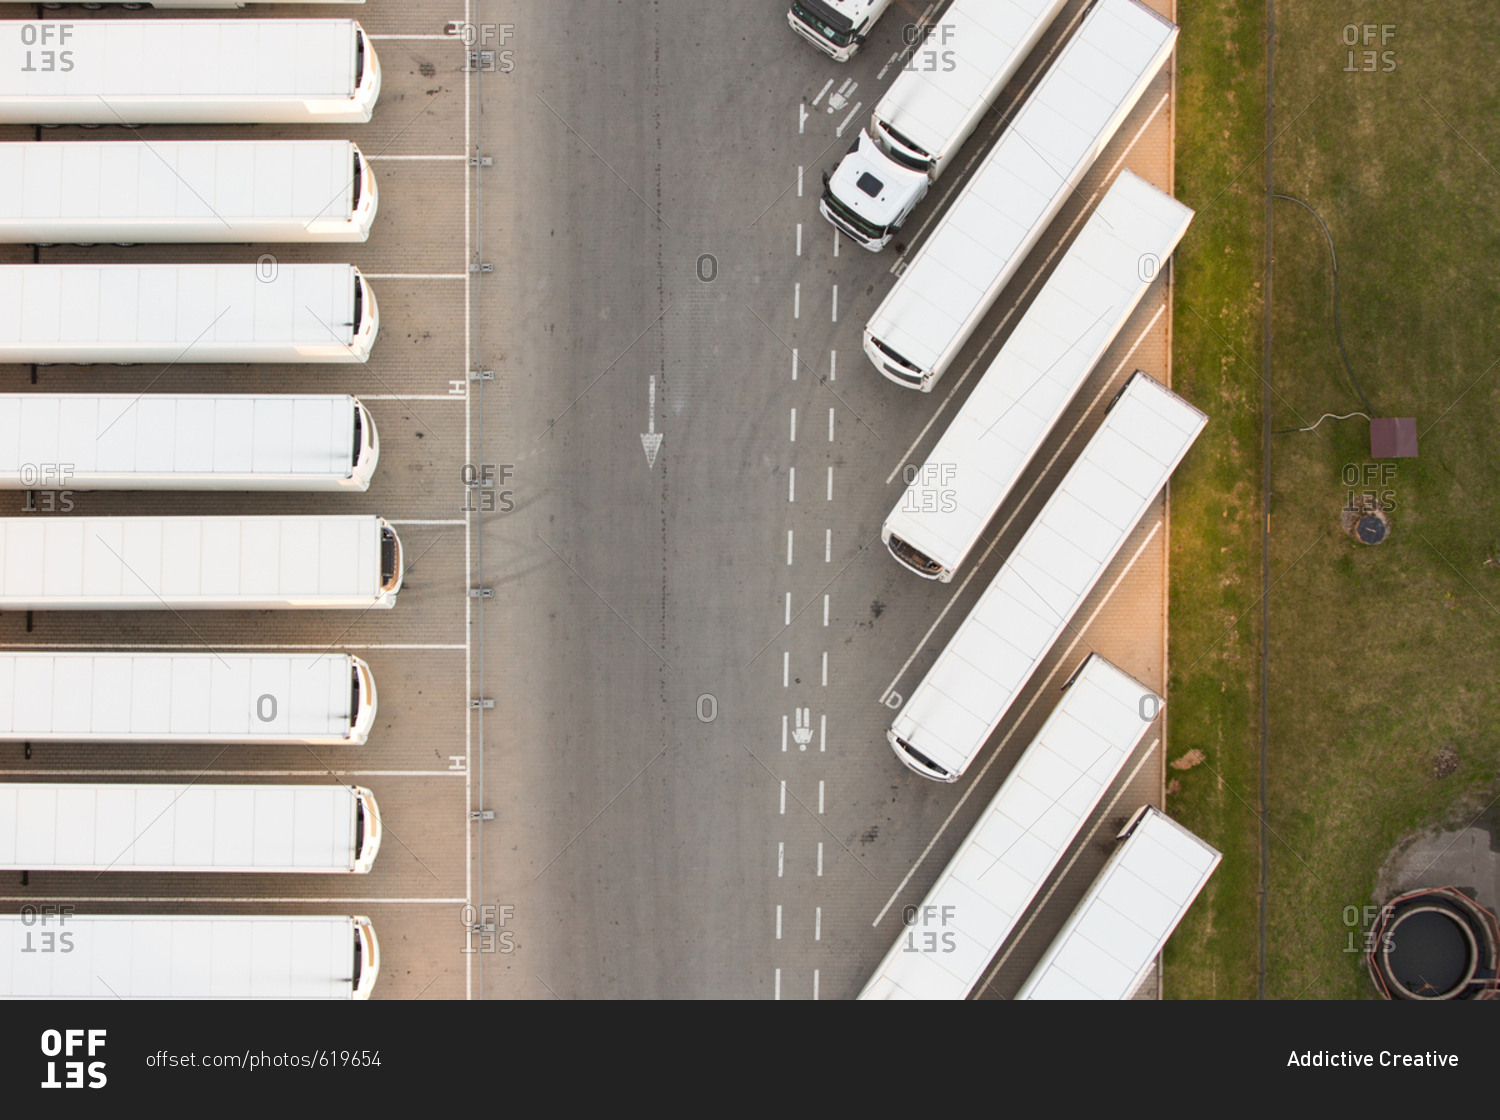 Parking with trucks from above